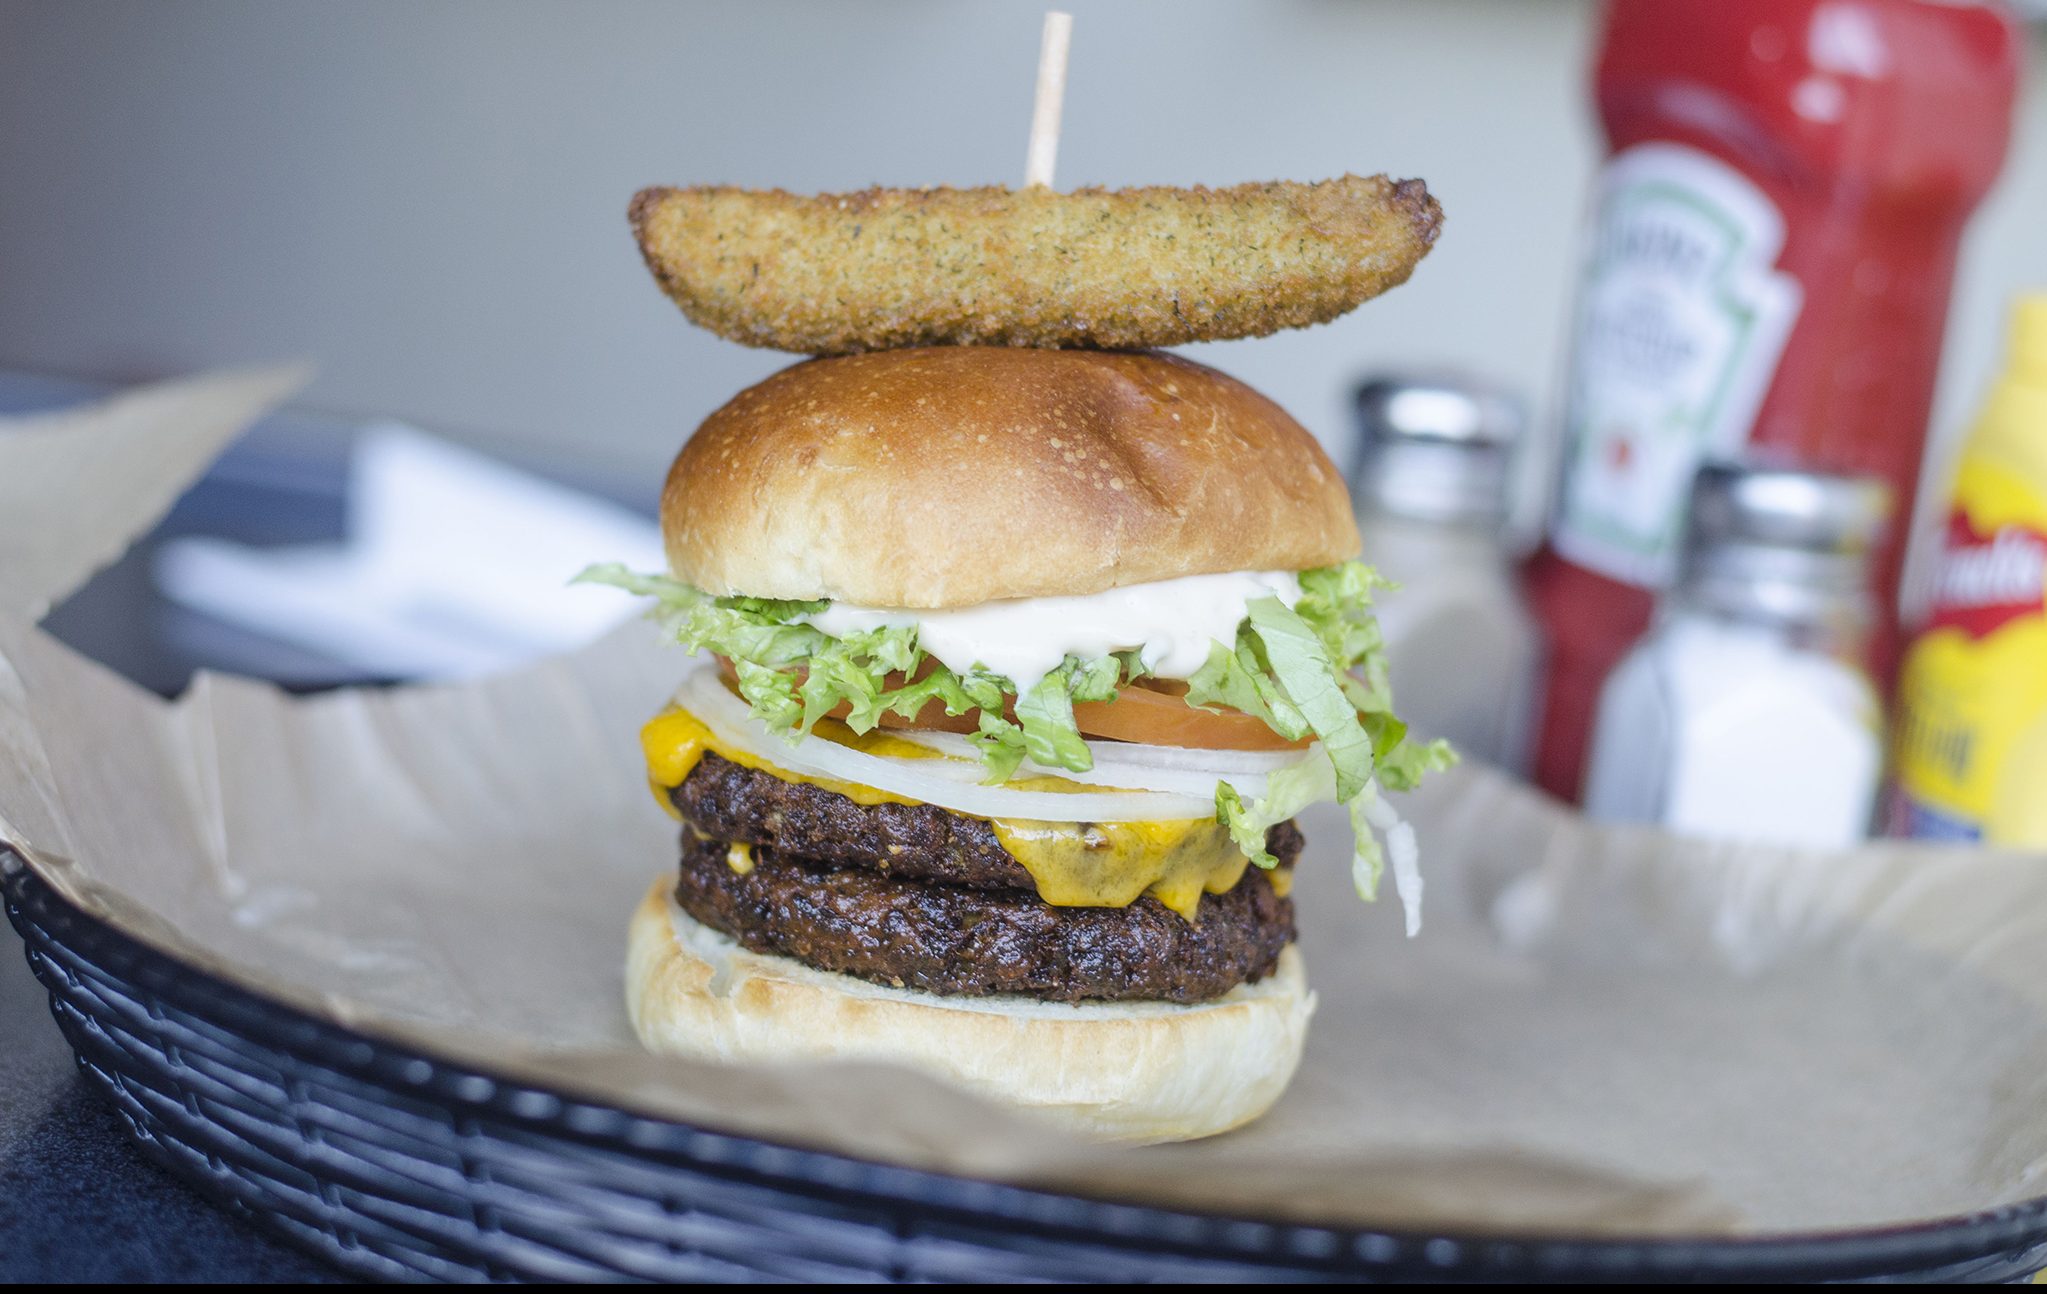 The Dill Pickle Burger from Atmosphere Fine Foods in Windsor, Ontario.